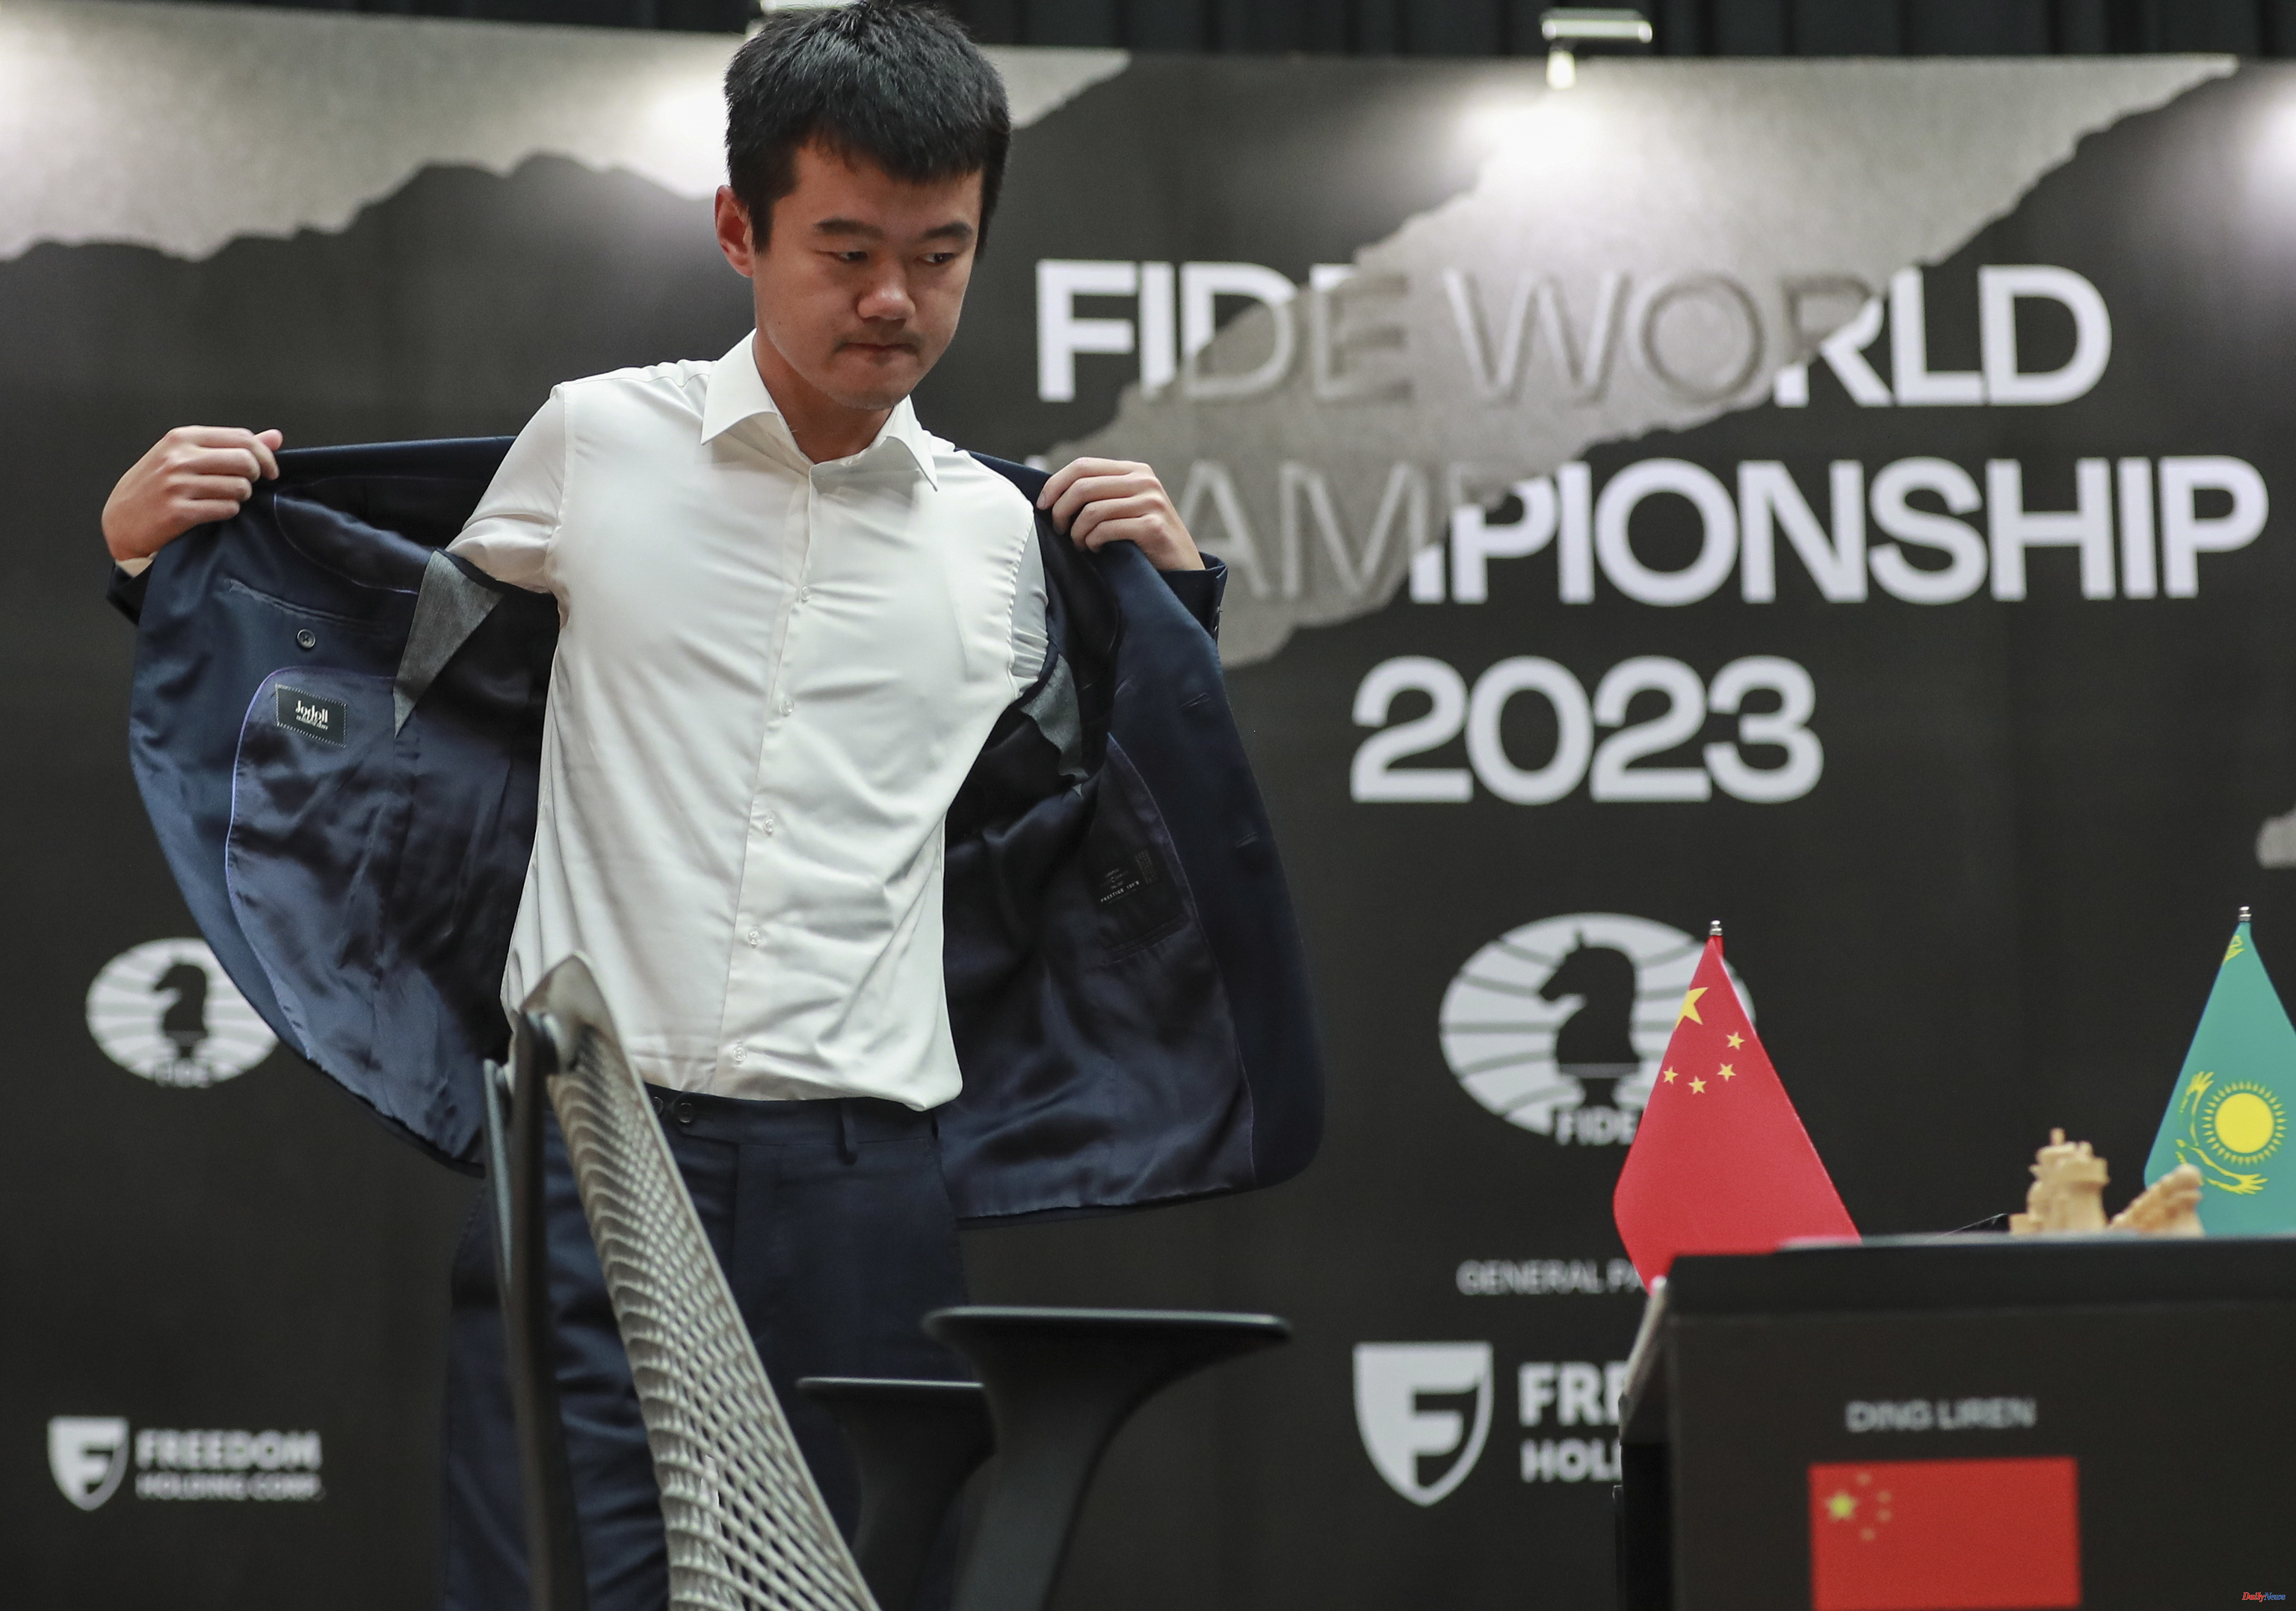 Sports Ding Liren, first world chess champion after Carlsen: the triumph of courage